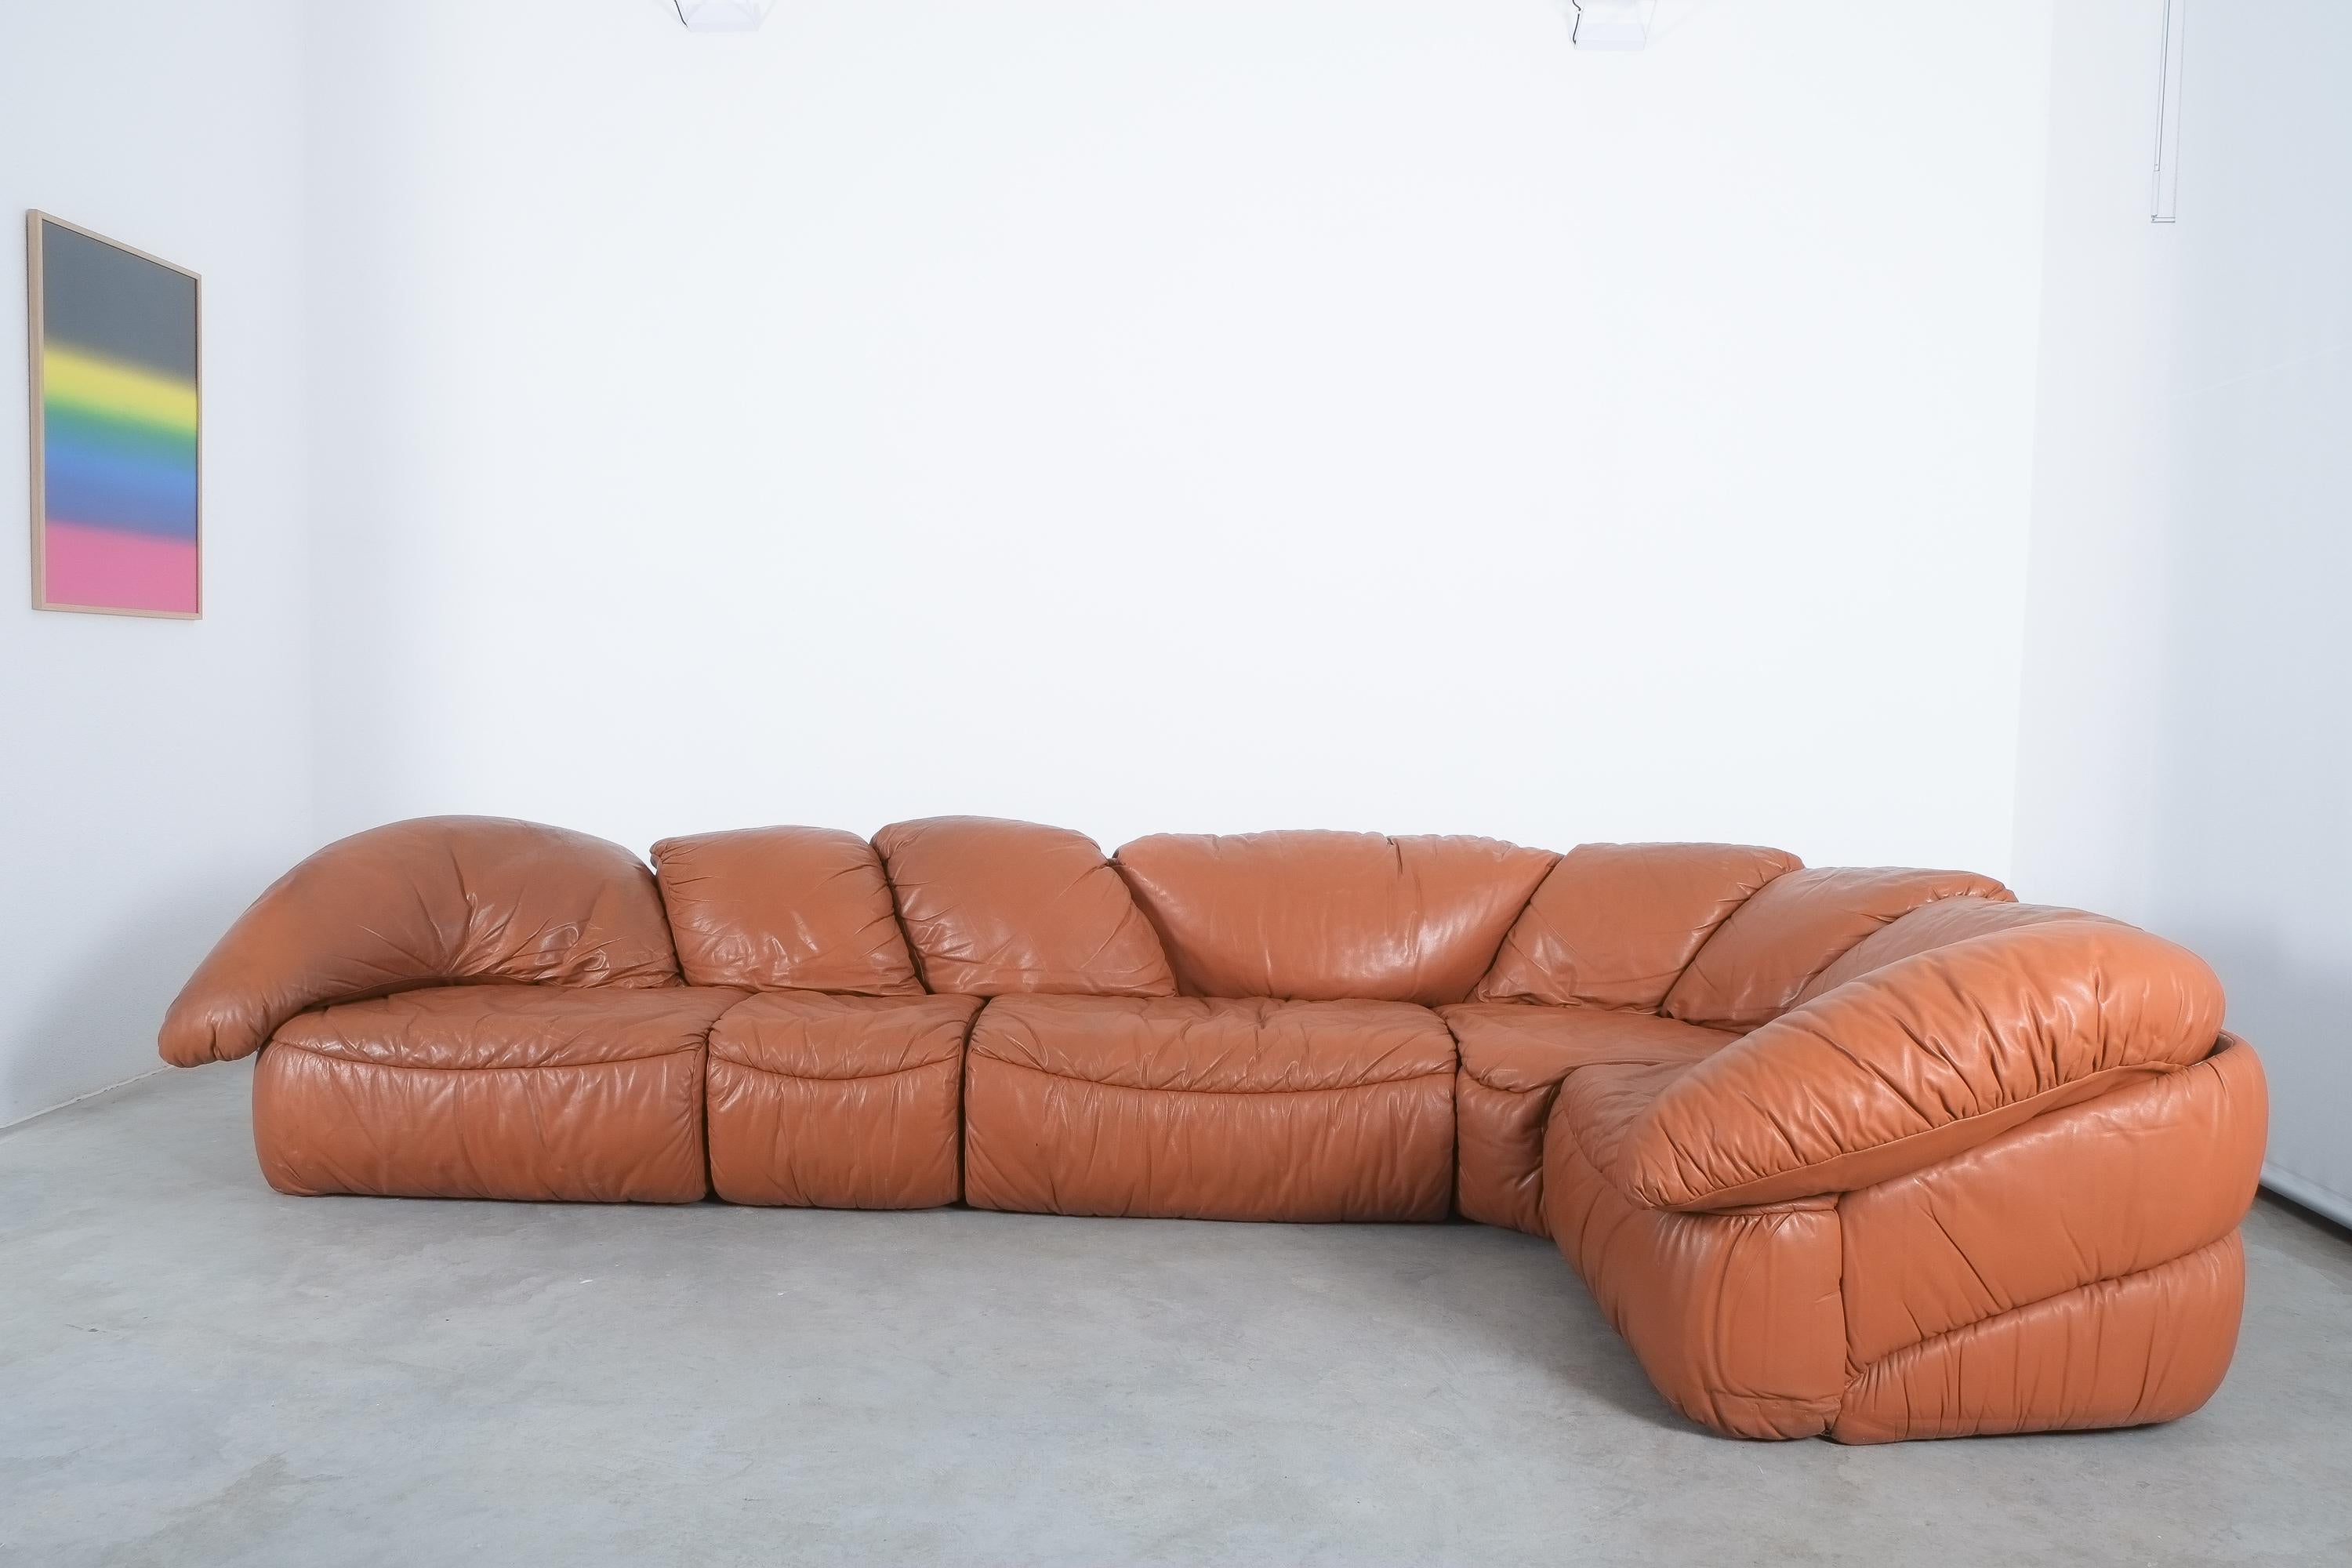 Wood Sectional Sofa Group by Wiener Werkstätten Brown Leather Croissant, Austria 1970